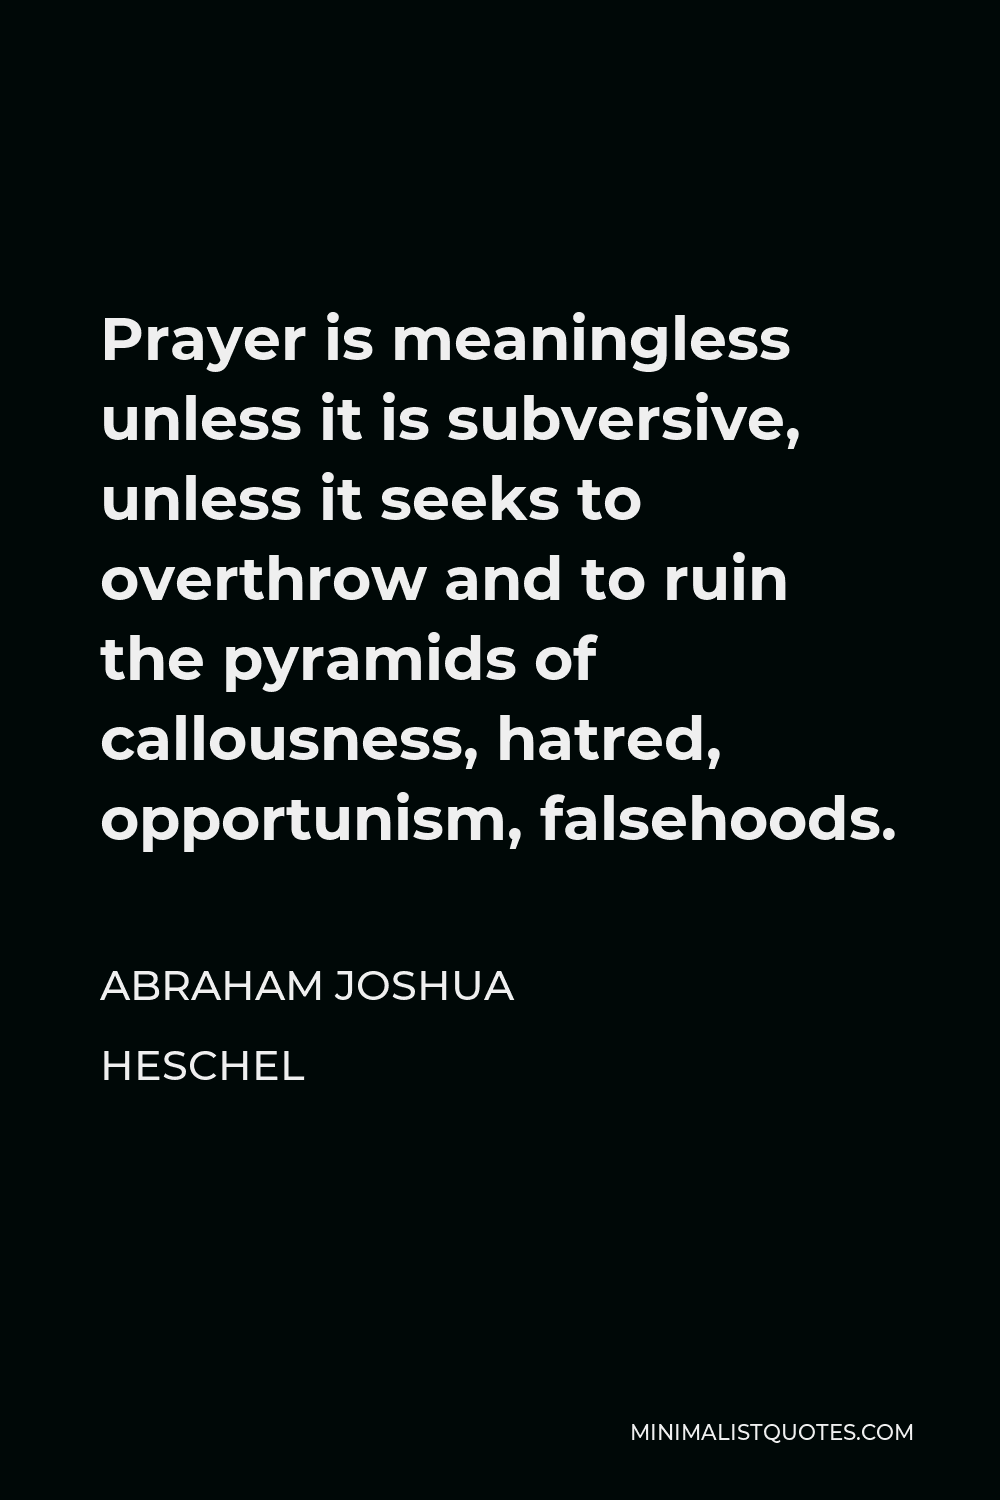 Abraham Joshua Heschel Quote - Prayer is meaningless unless it is subversive, unless it seeks to overthrow and to ruin the pyramids of callousness, hatred, opportunism, falsehoods.